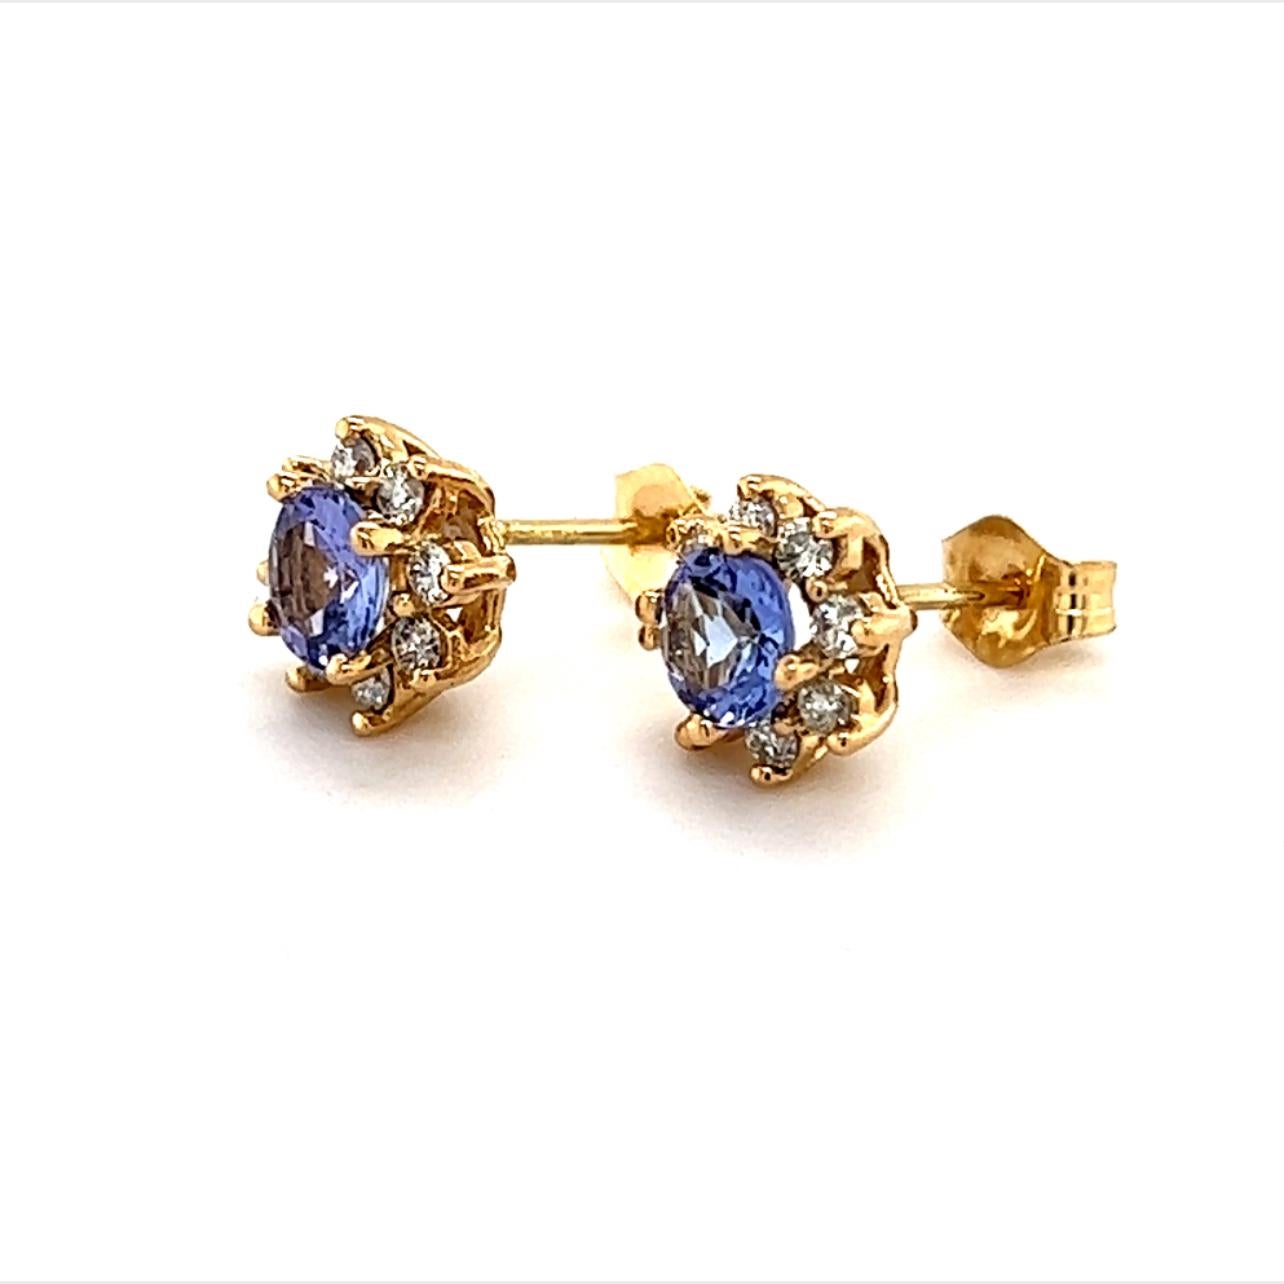 Natural Sapphire Diamond Earrings 14k Gold 1.0 TCW Certified For Sale 5